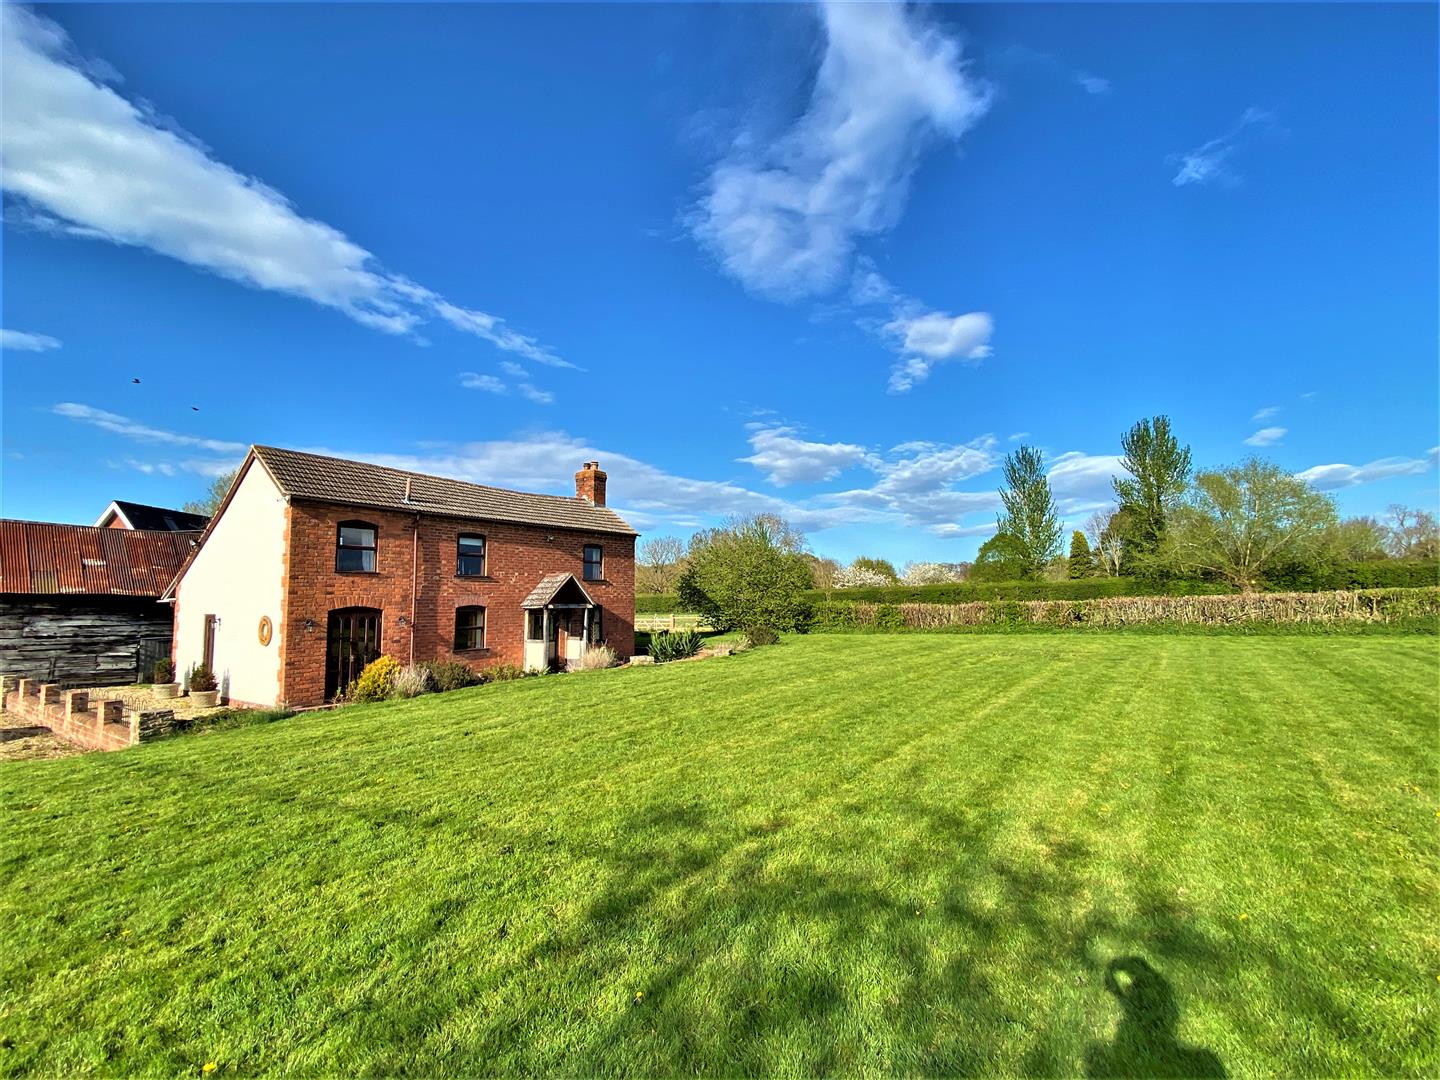 3 bed detached for sale in Bodenham  - Property Image 1